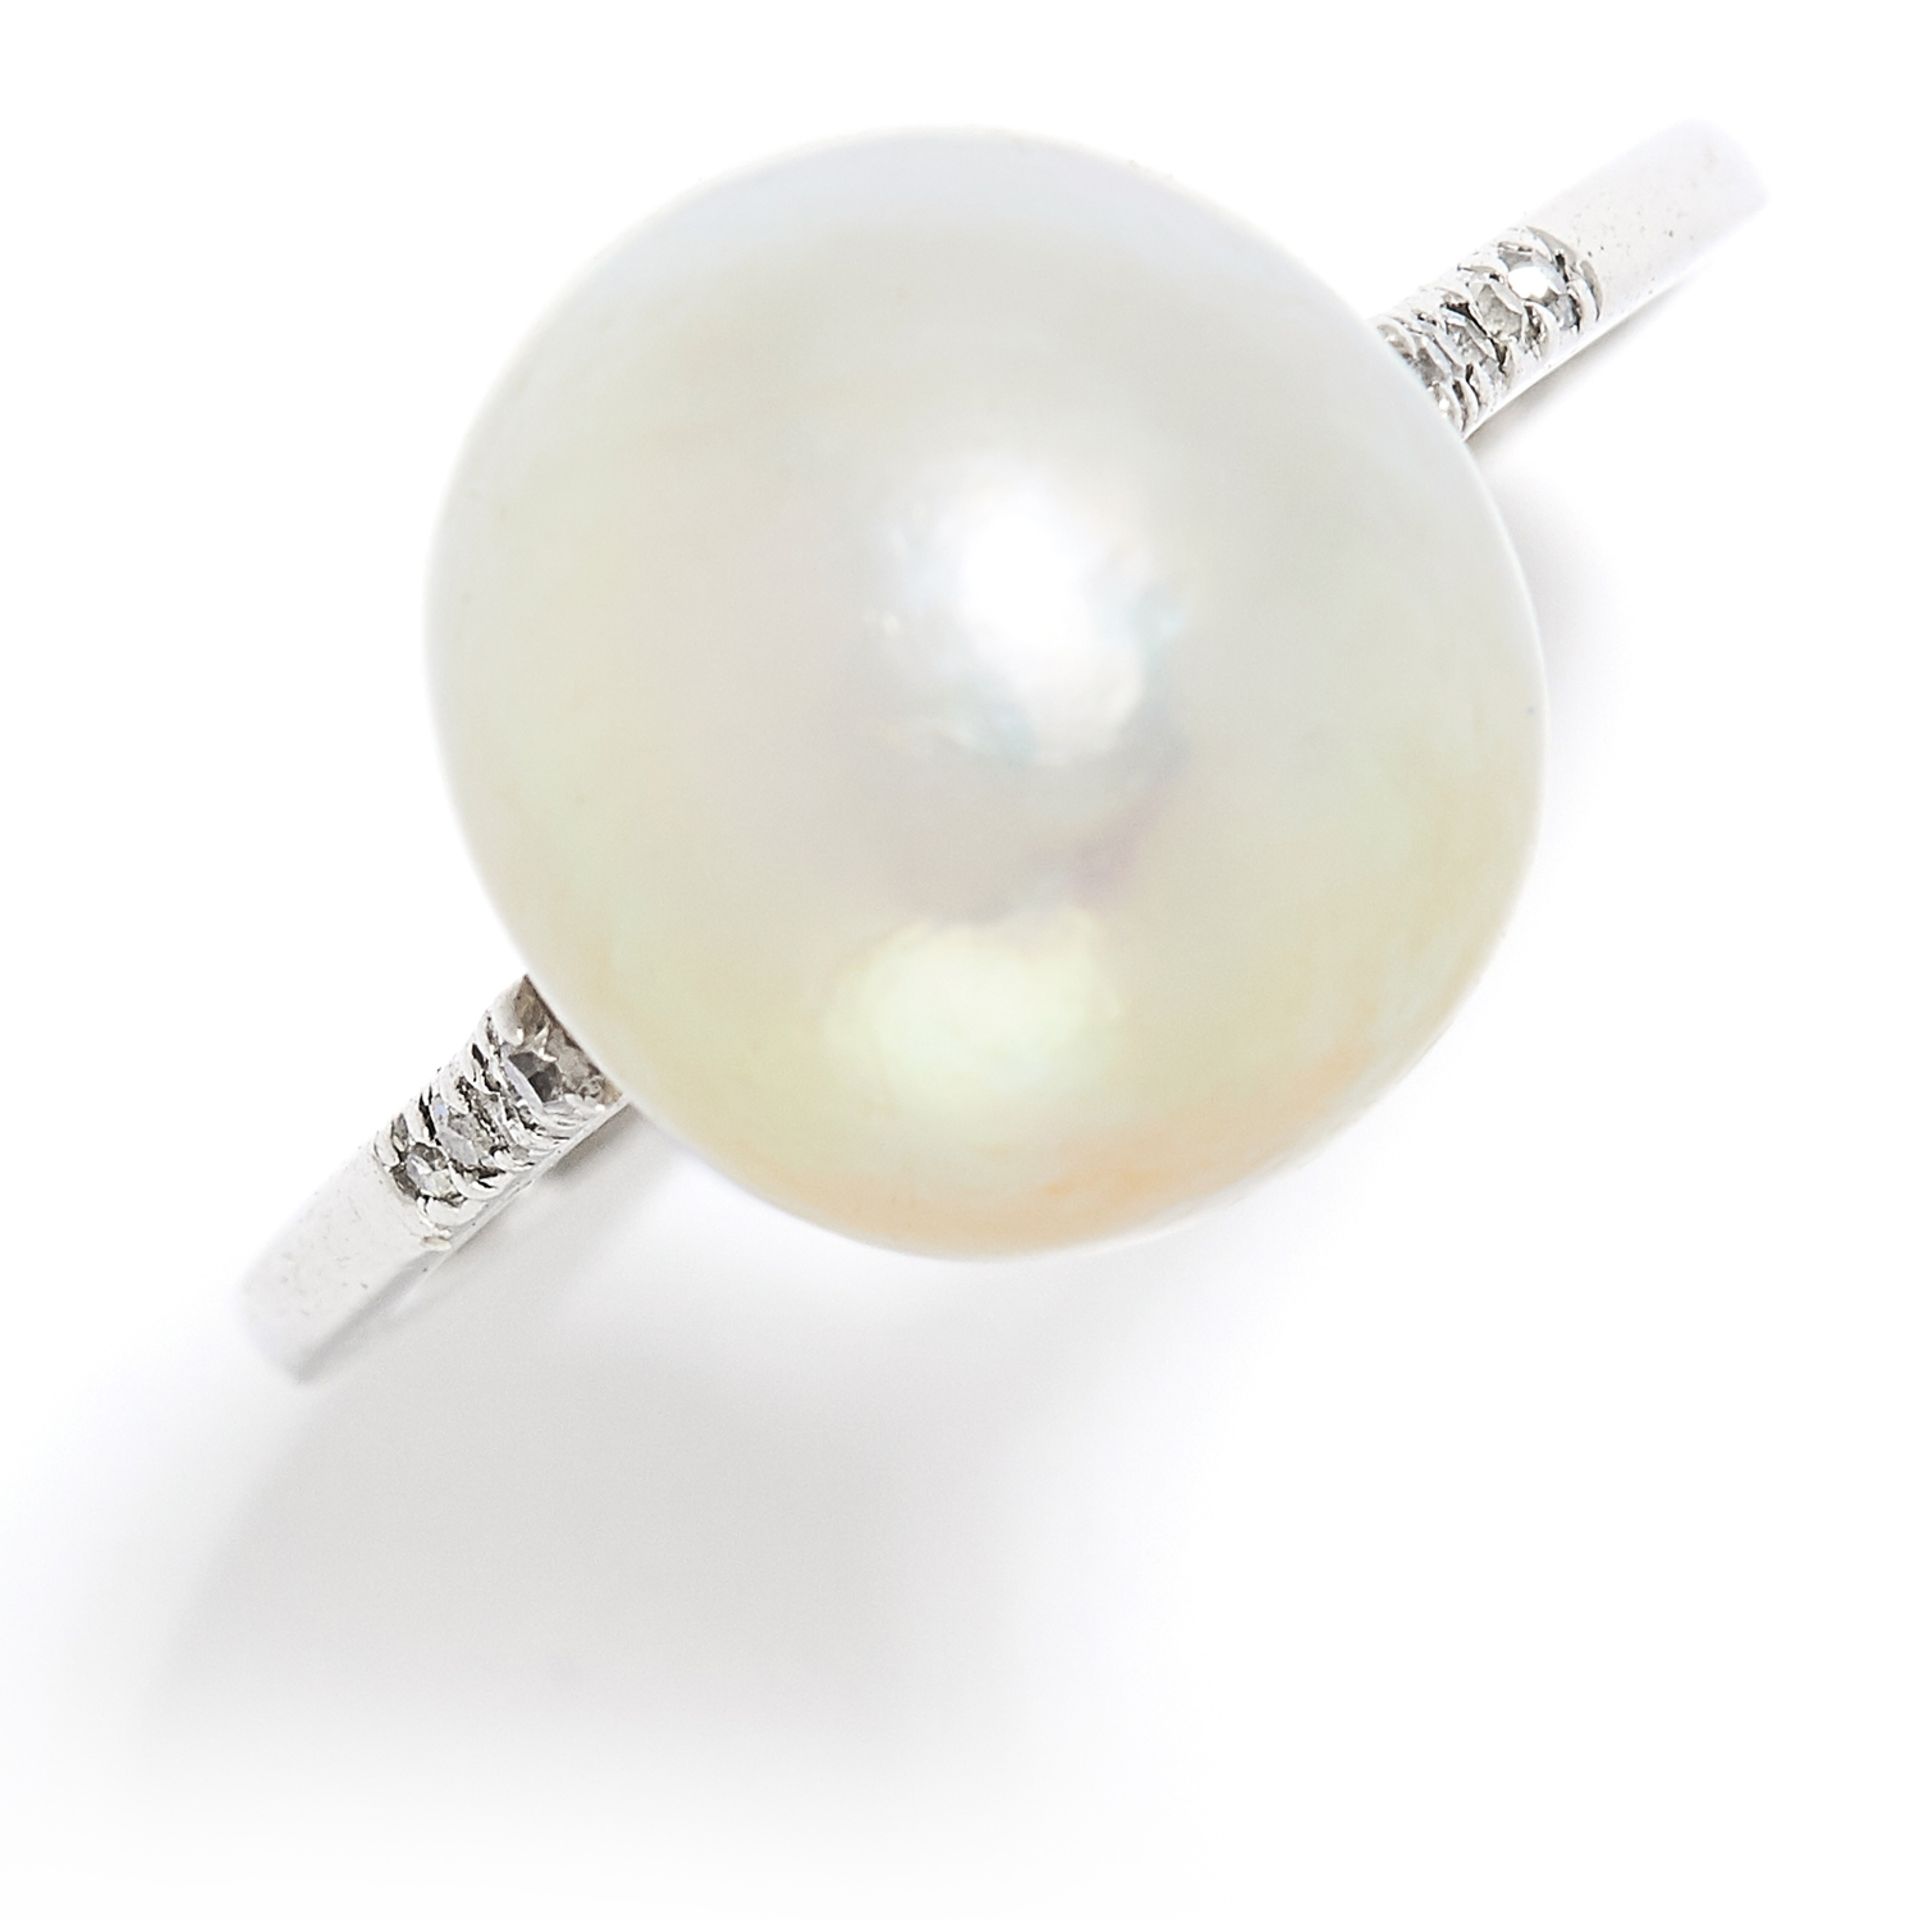 ANTIQUE NATURAL PEARL AND DIAMOND RING in platinum or white gold, set with a pearl of 11.3mm,